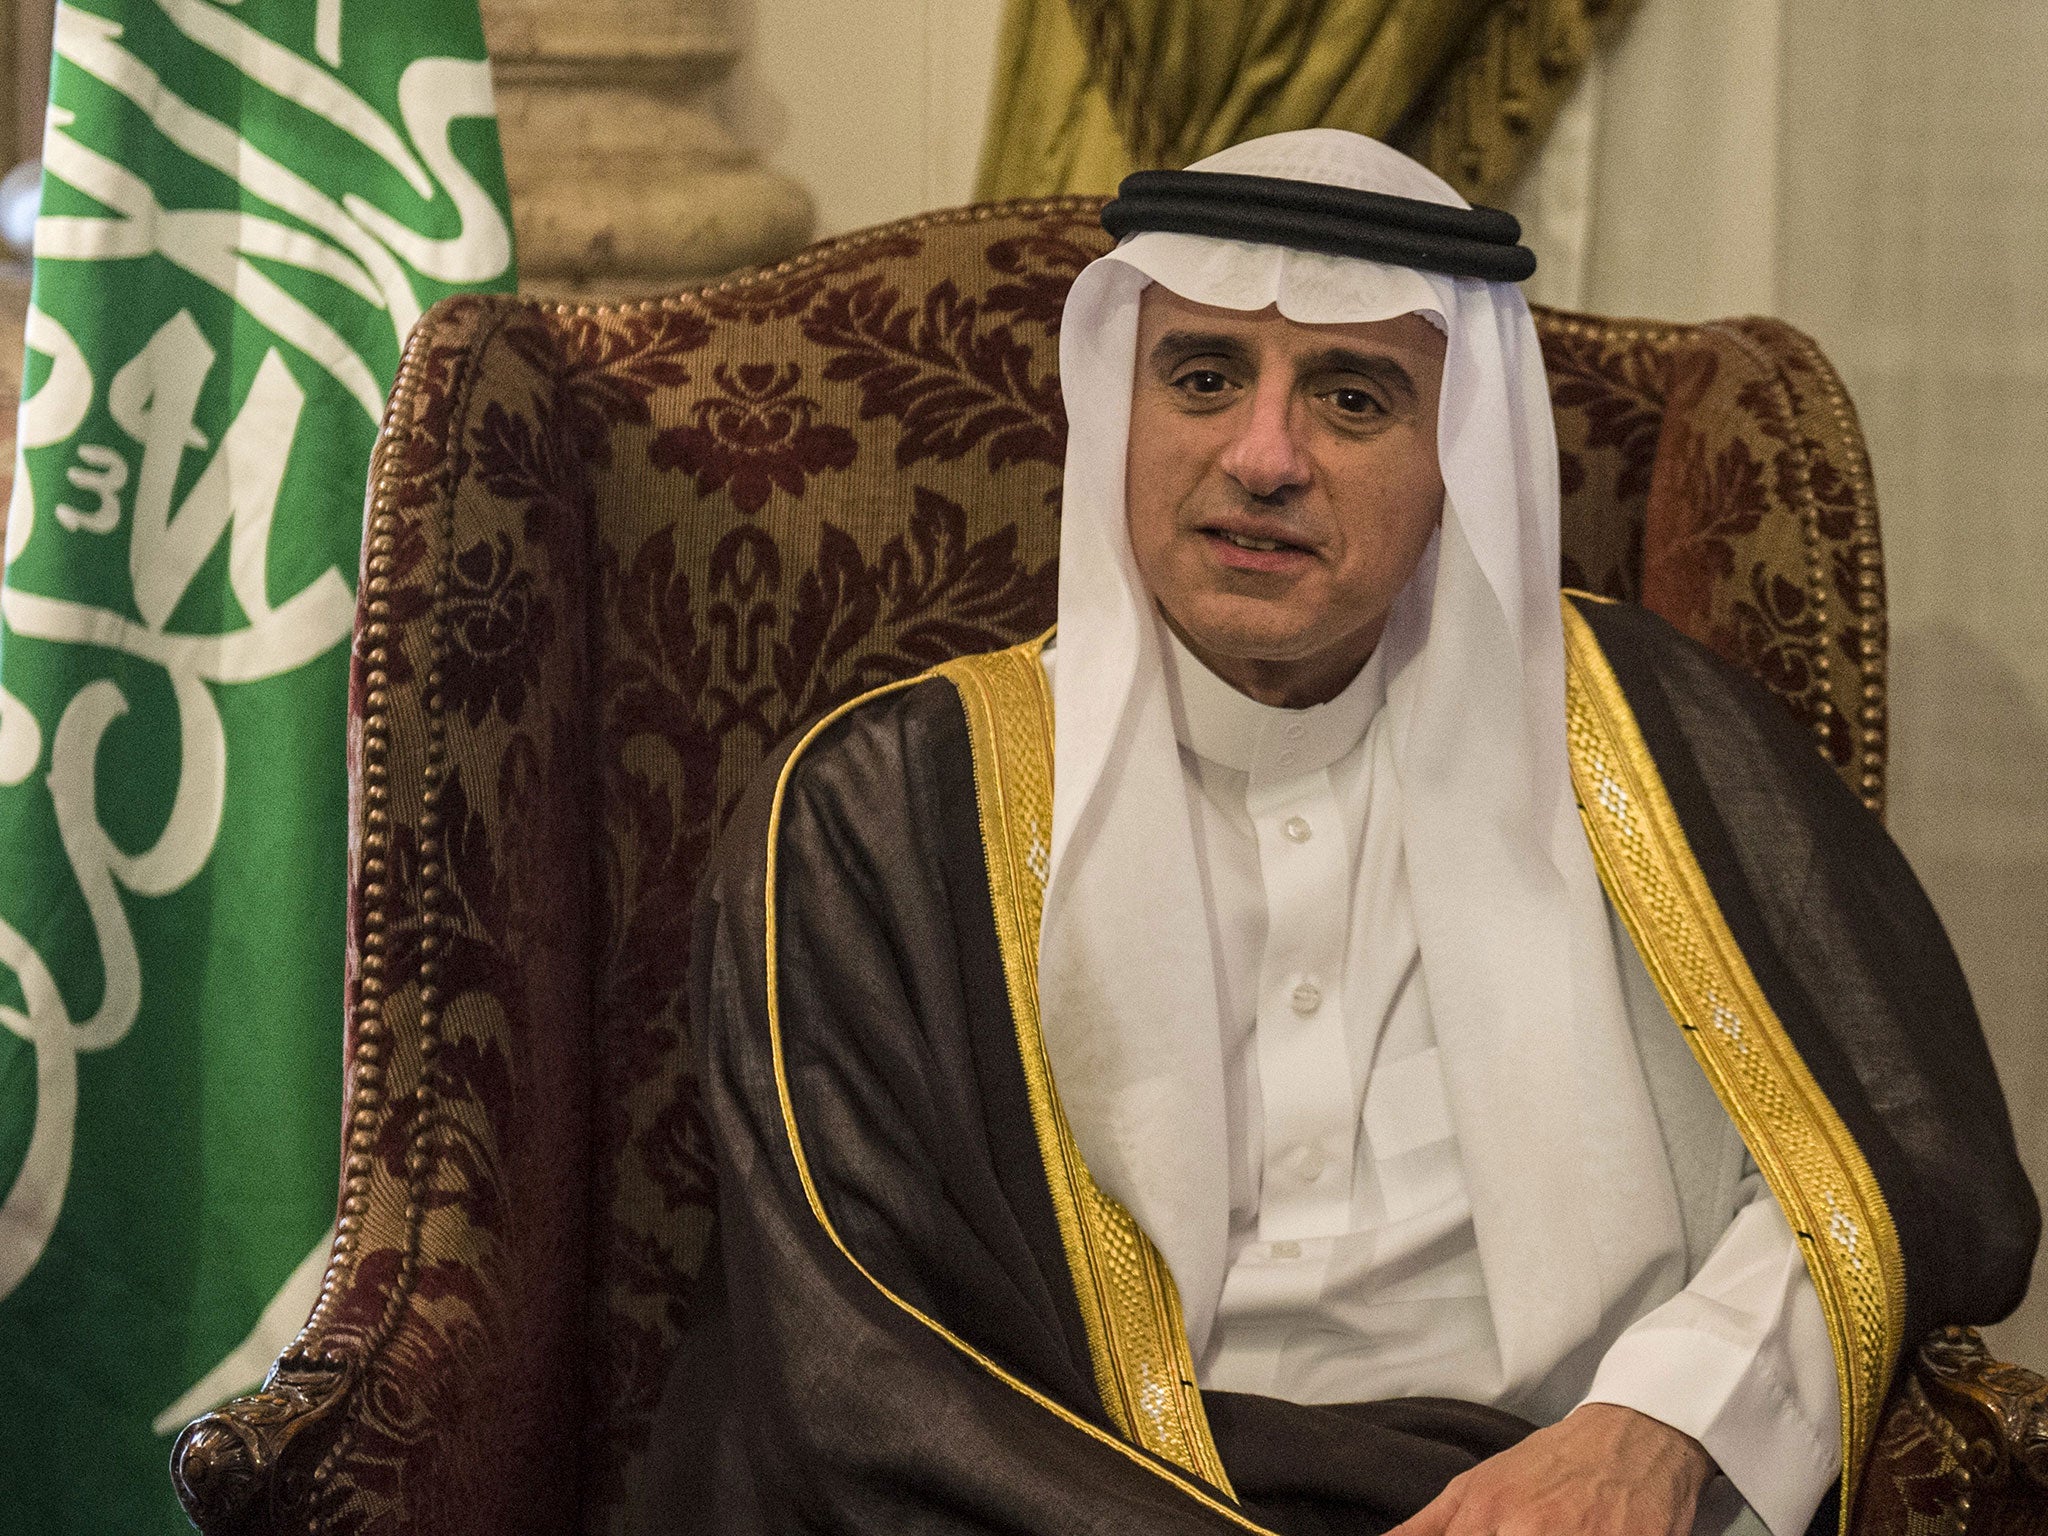 Adel Al-Jubeir, Saudi Arabia's Foreign Minister, says the Kingdom is committed to two things: 'our faith and our security'